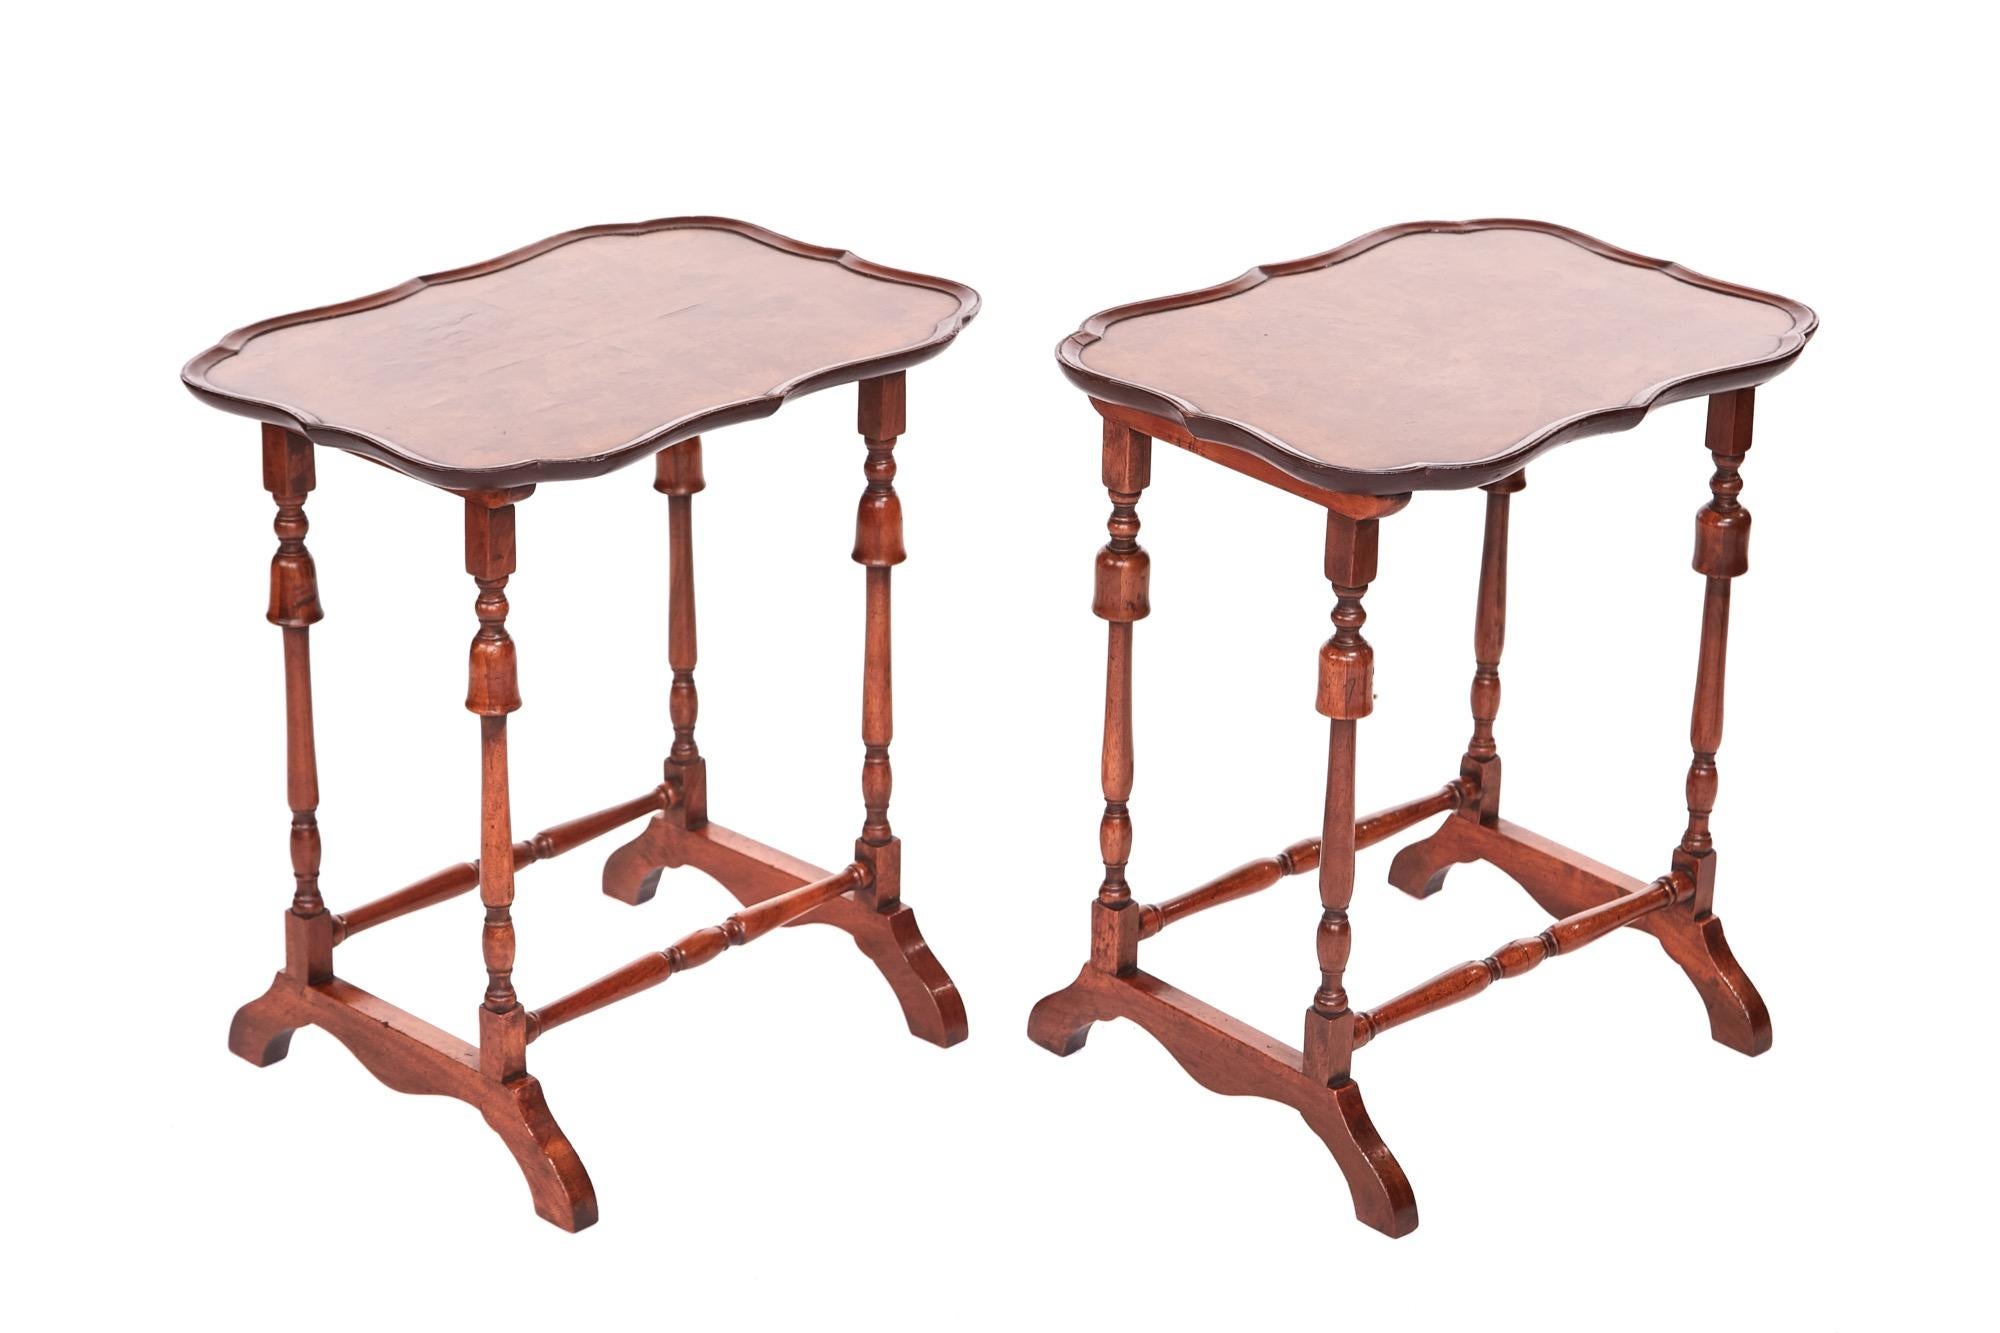 Quality pair of antique burr walnut lamp tables having lovely shaped burr walnut tops with a pie crust carved shaped edge supported by four turned legs with turned cross stretchers standing on shaped platform feet. Lovely color and